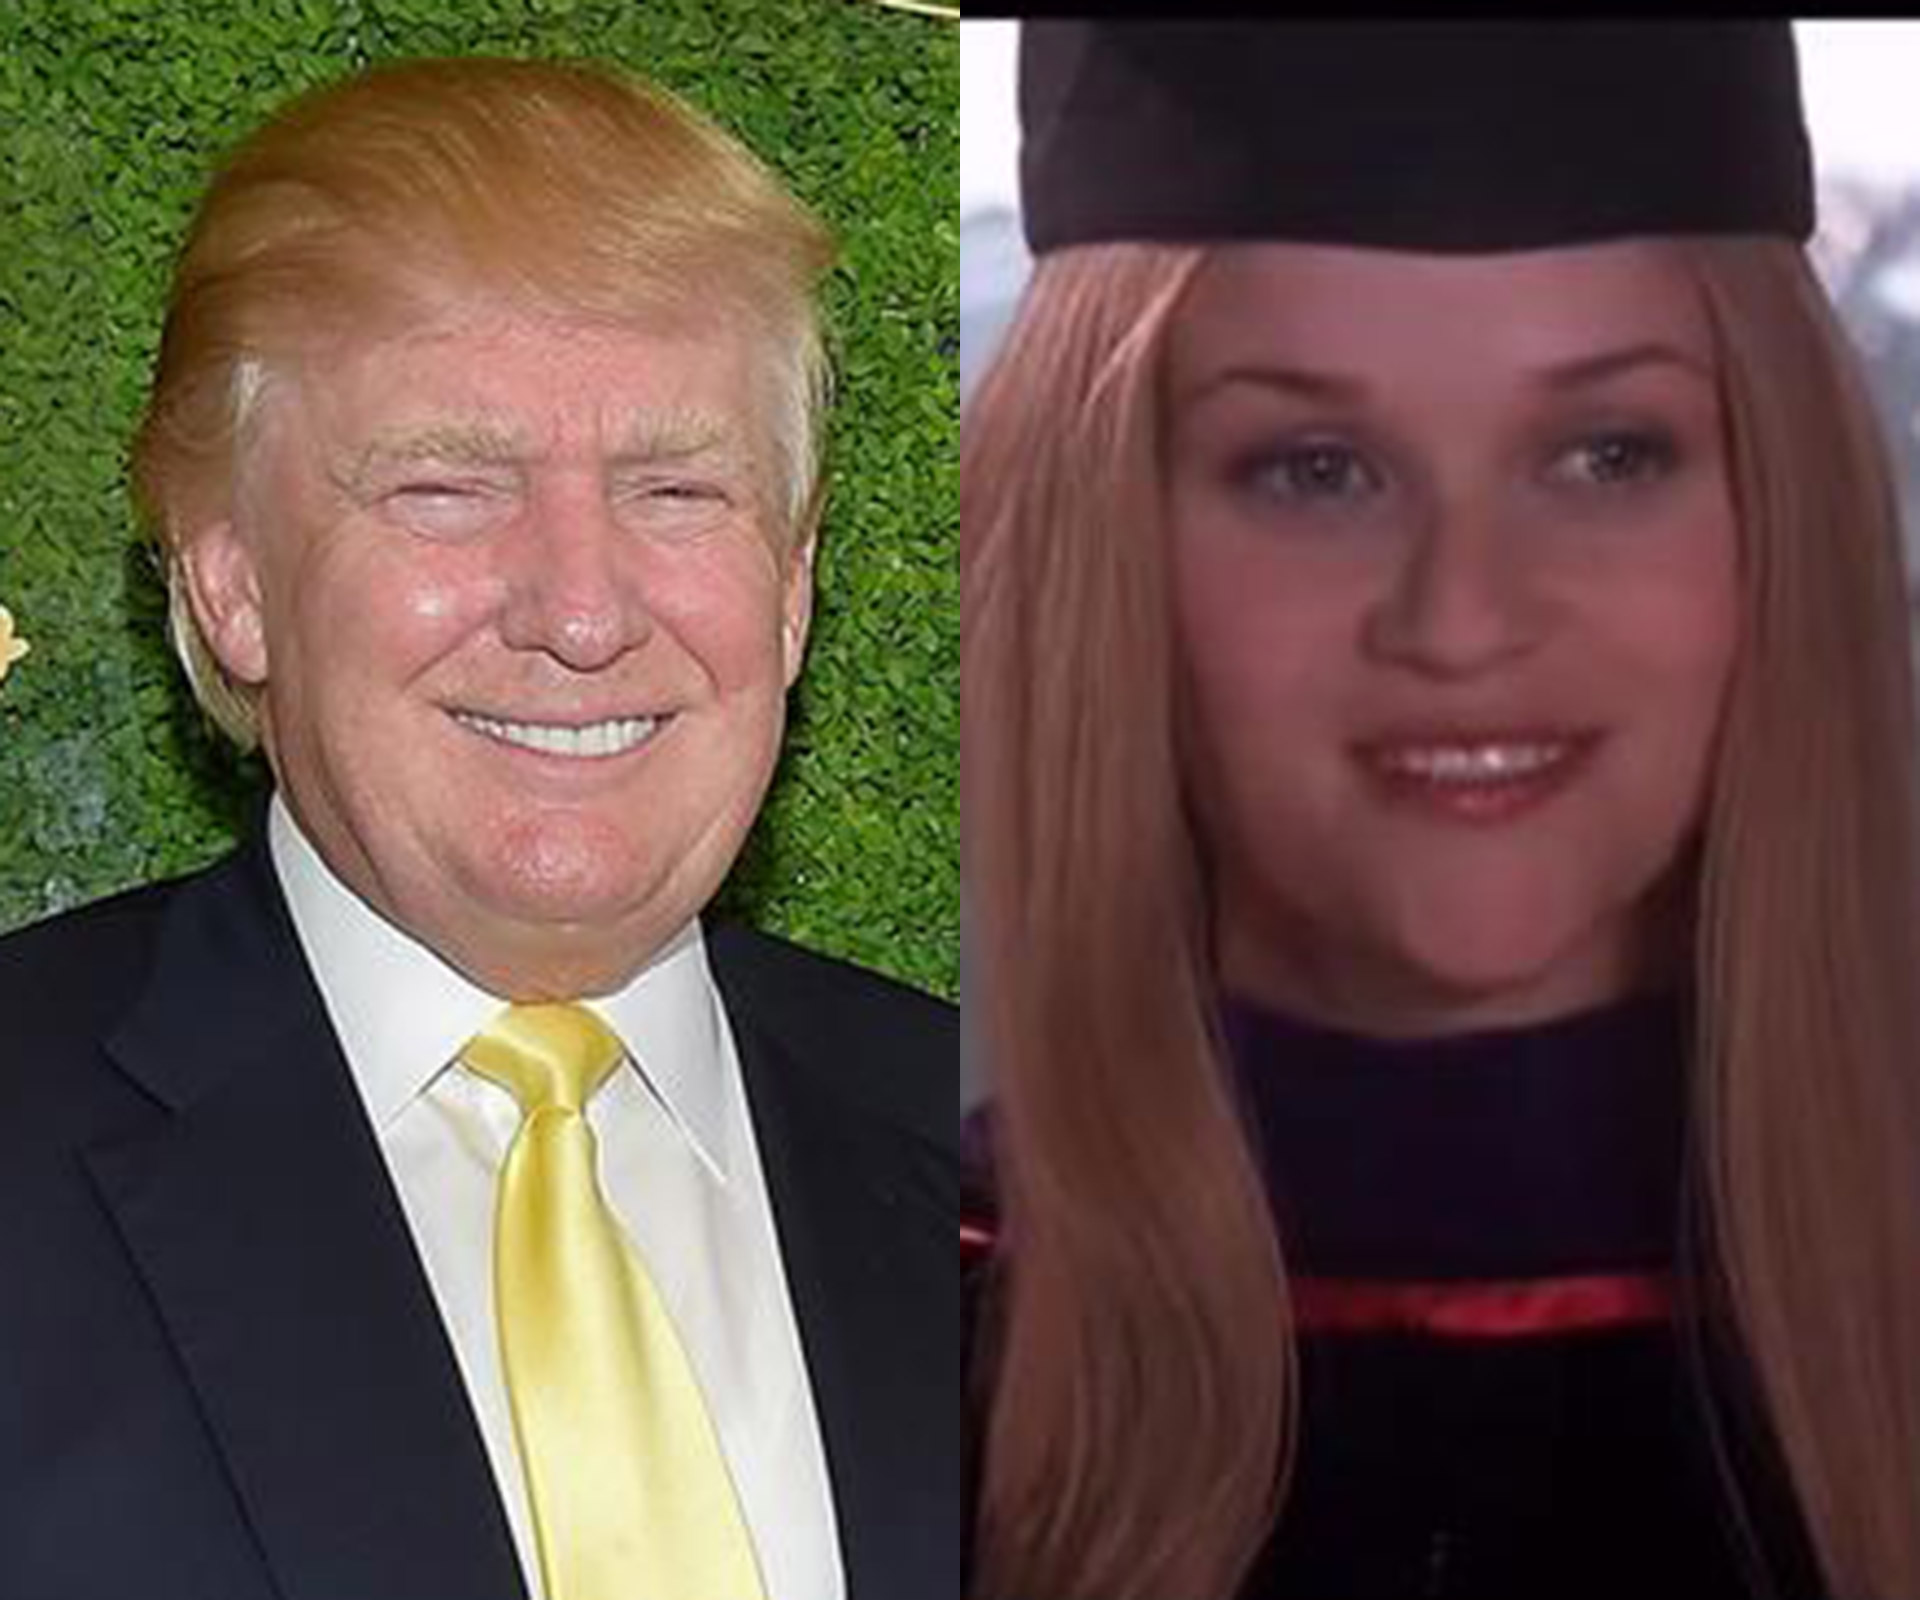 Donald Trump totally ripped off a speech from Legally Blonde and here’s the evidence